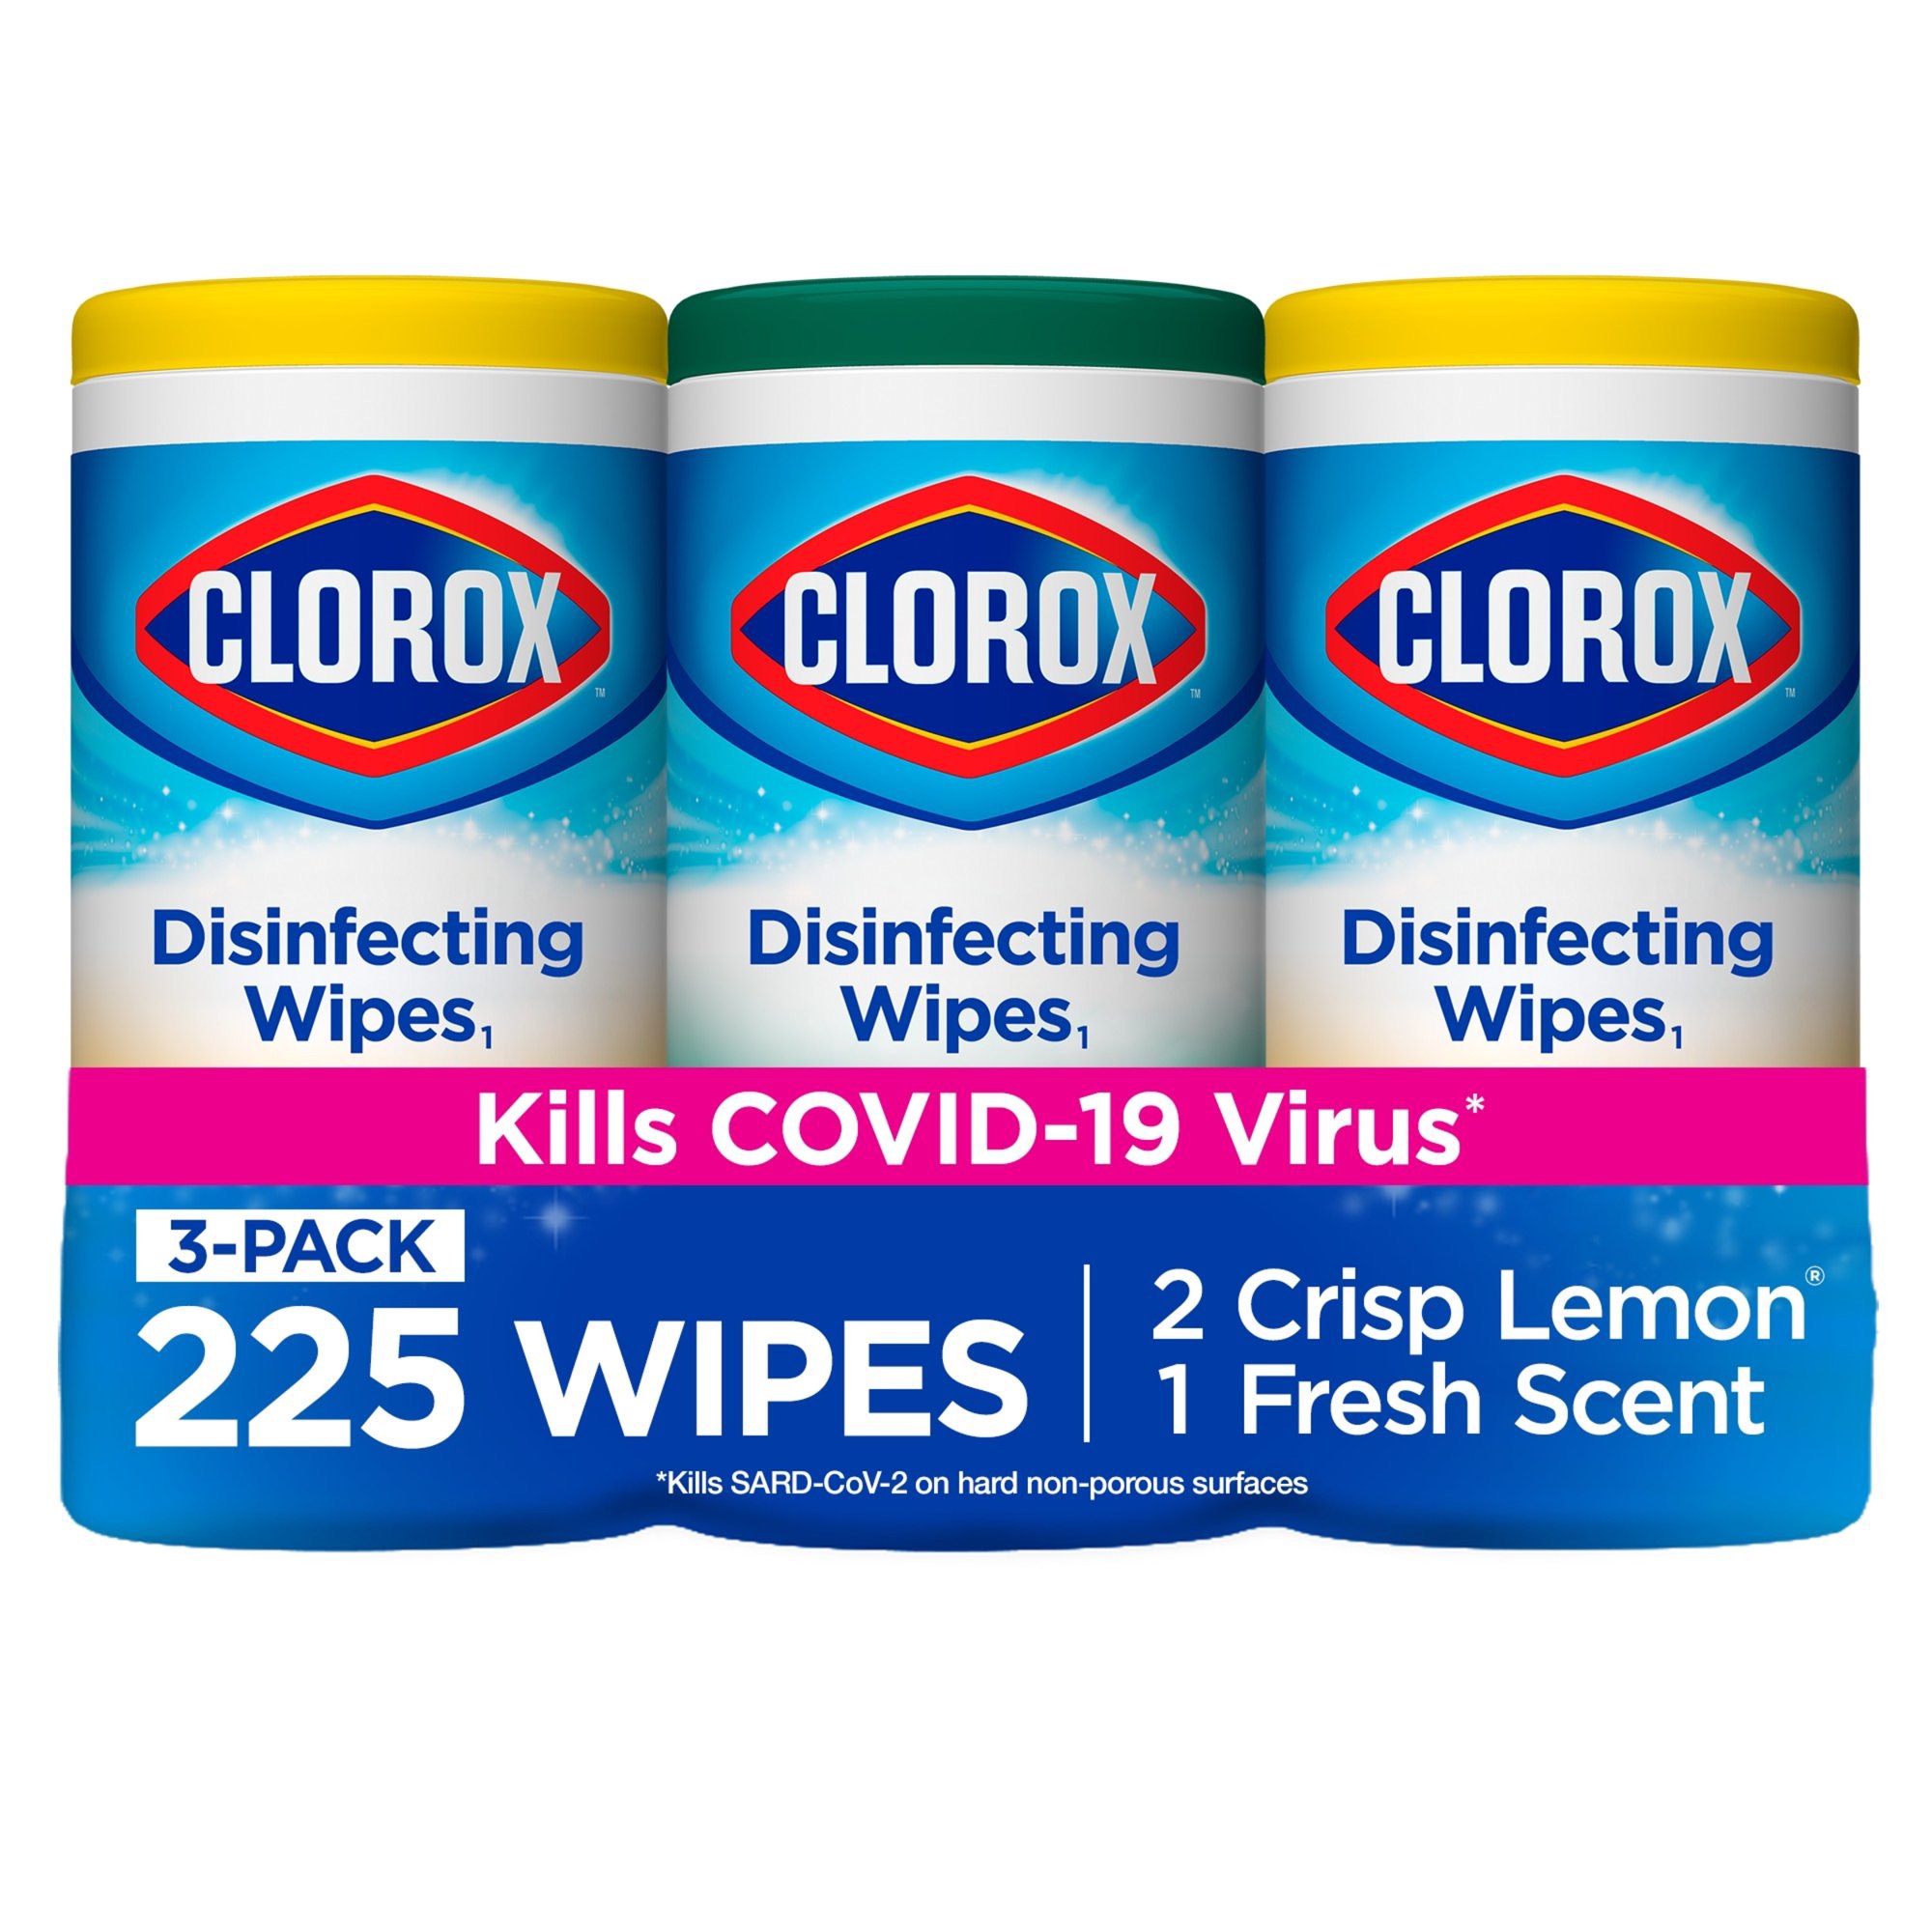 Walmart Clorox Disinfecting Wipes, (225 Count Value Pack), Crisp Lemon and Fresh Scent - 3 Pack - 75 Count Each 到货啦。